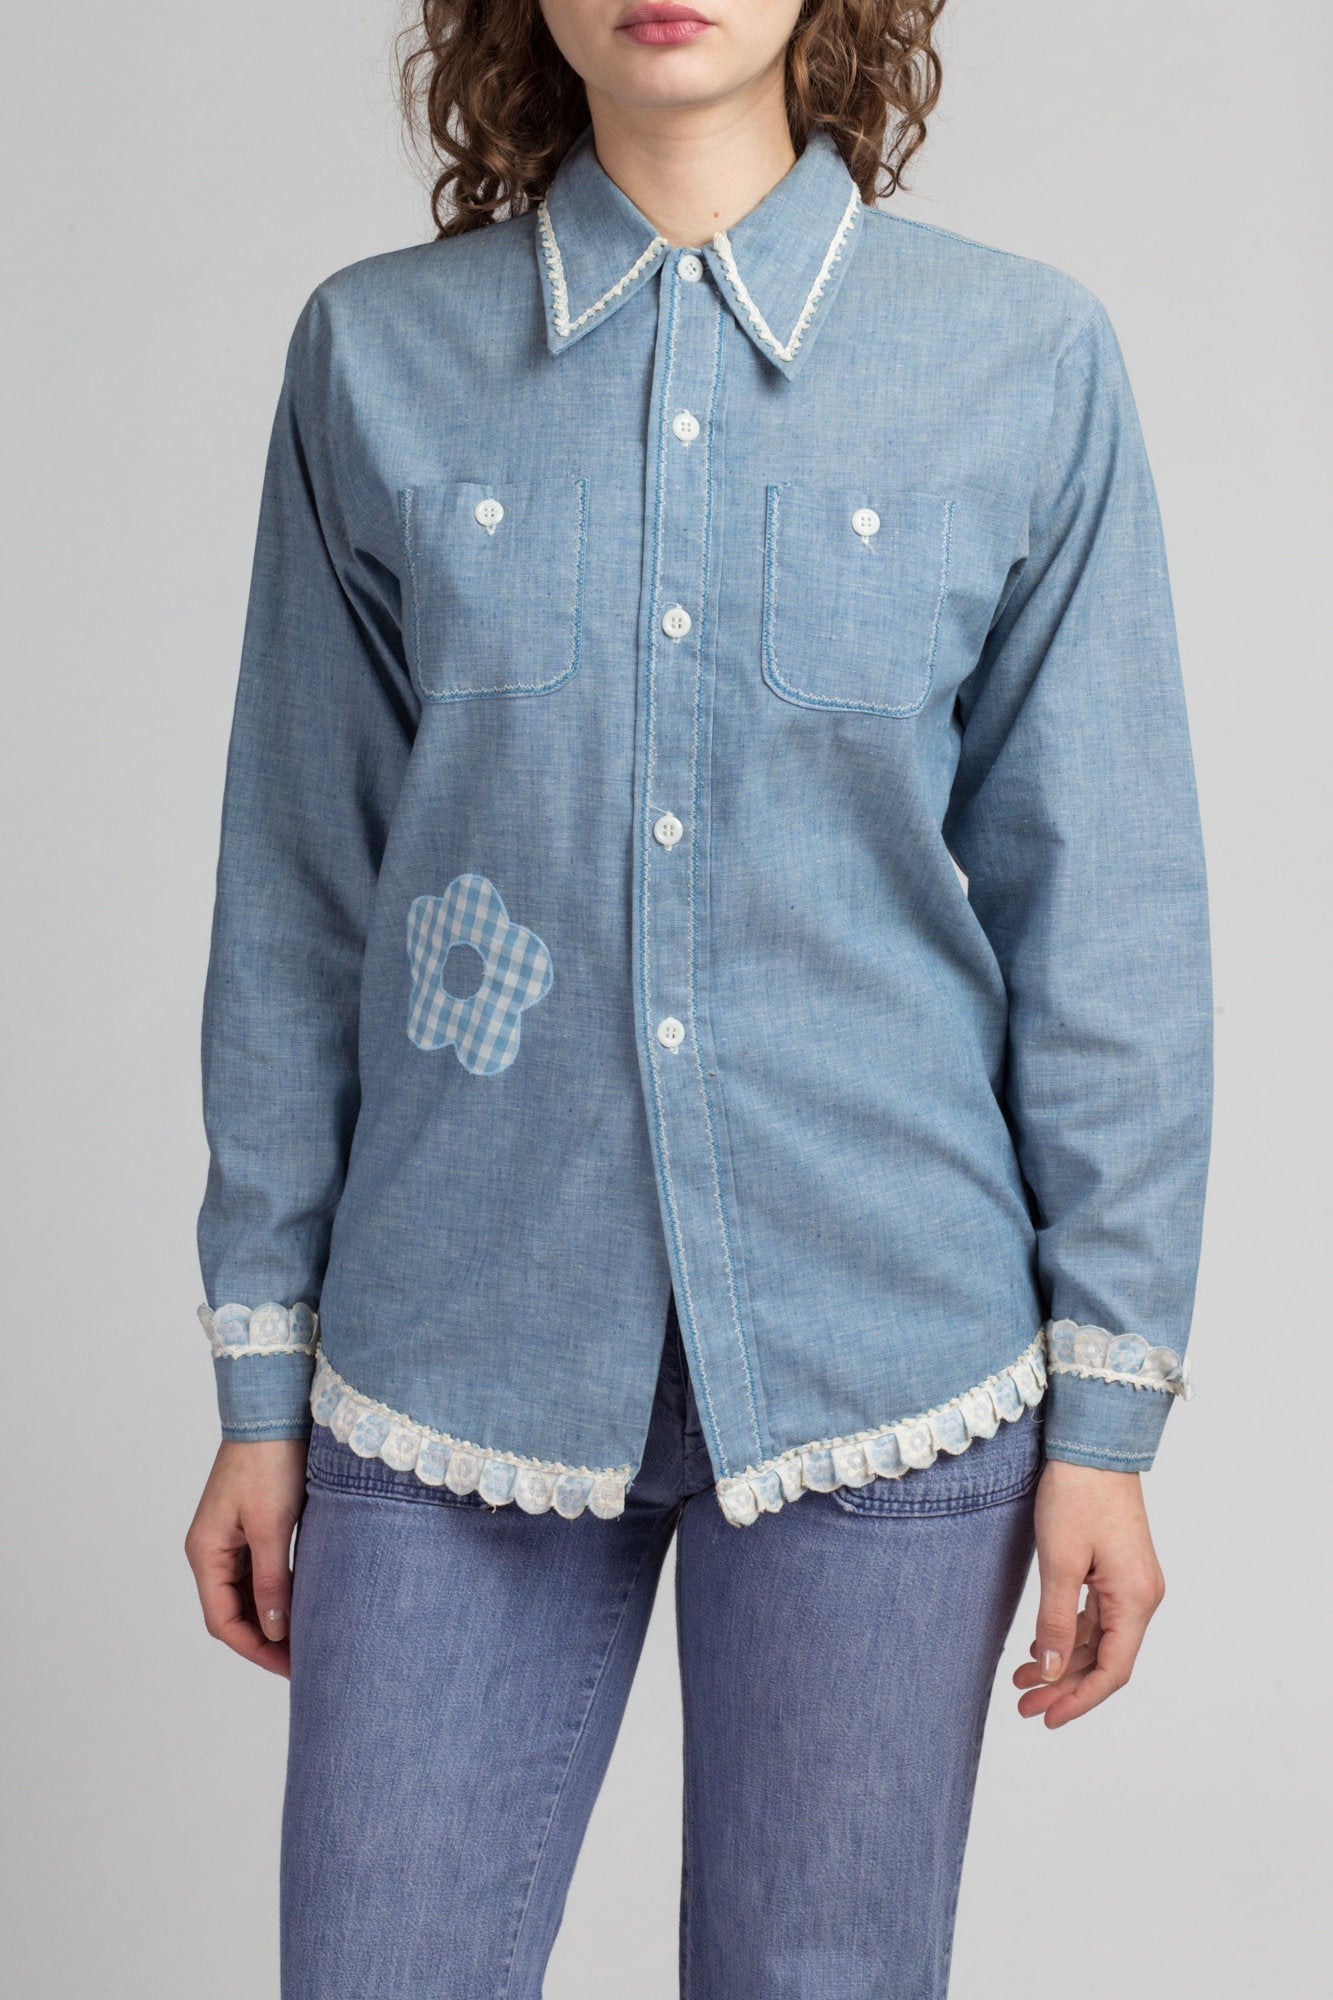 70s Chambray Whale Patchwork Shirt - Small | Vintage Blue Lightweight Lace Trim Button Up Top